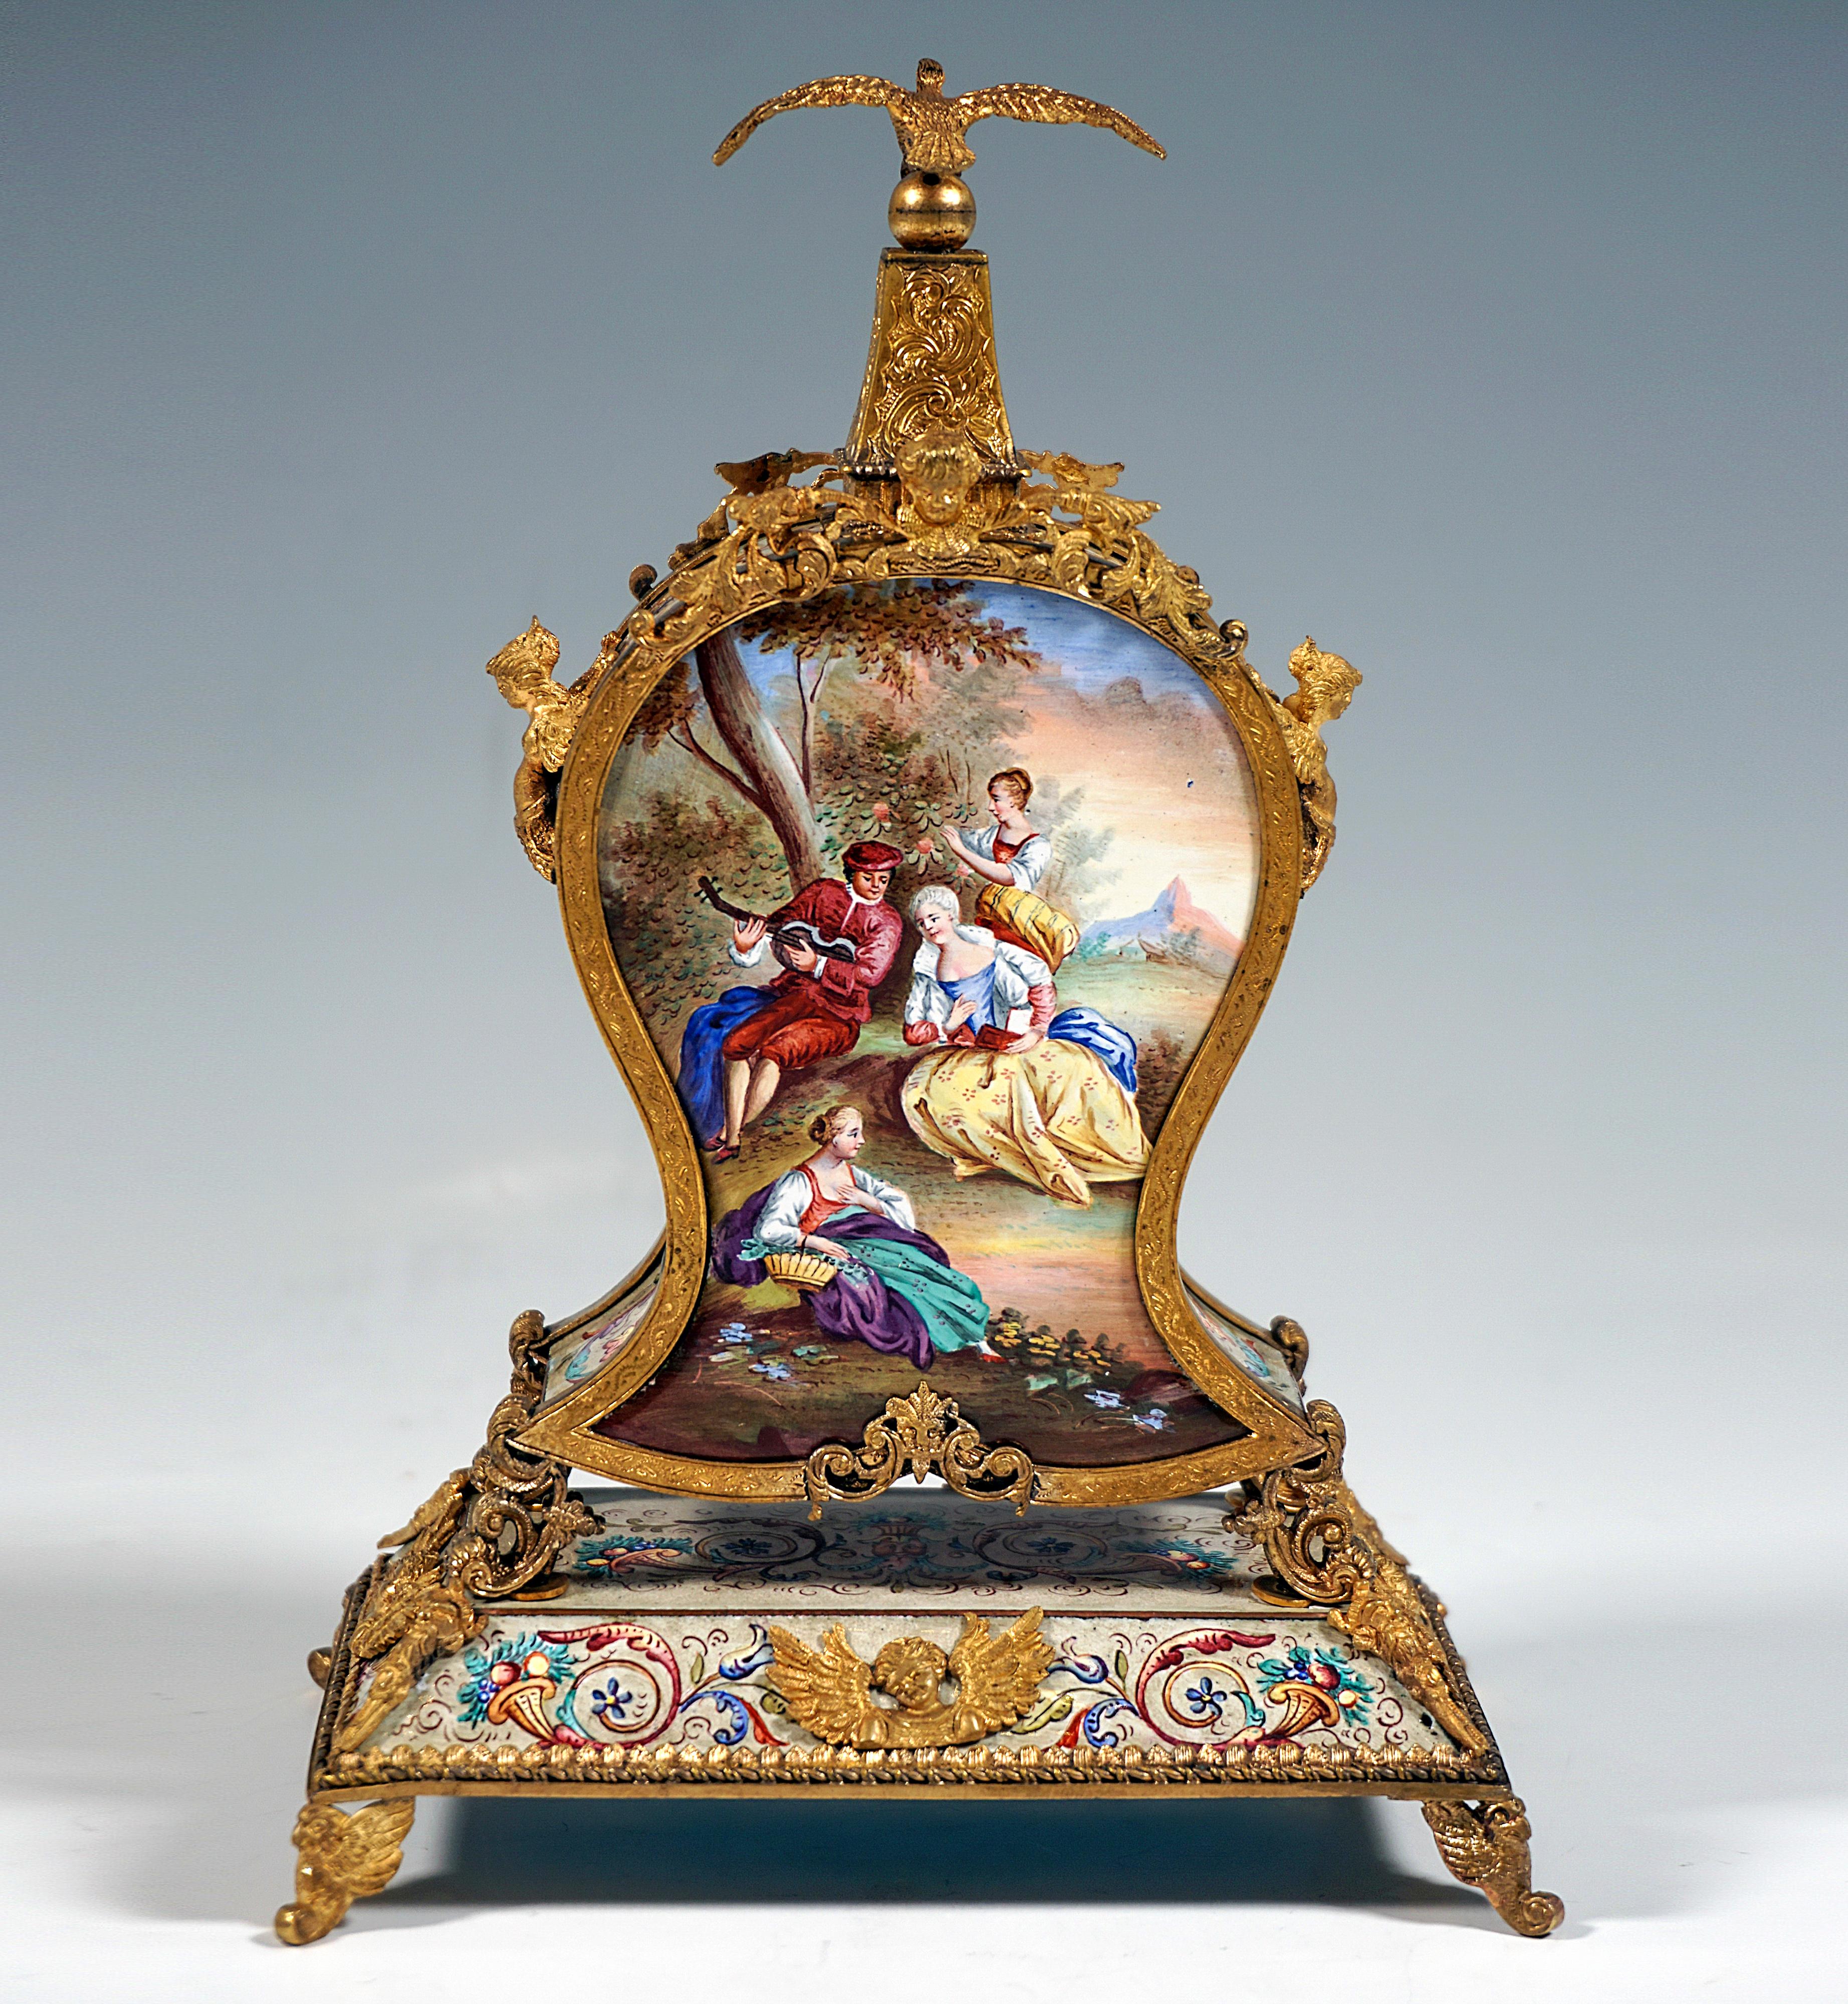 Austrian  Viennese Gilt Silver & Enamel Table Clock With Gallant Scenes Painting, Ca 1880